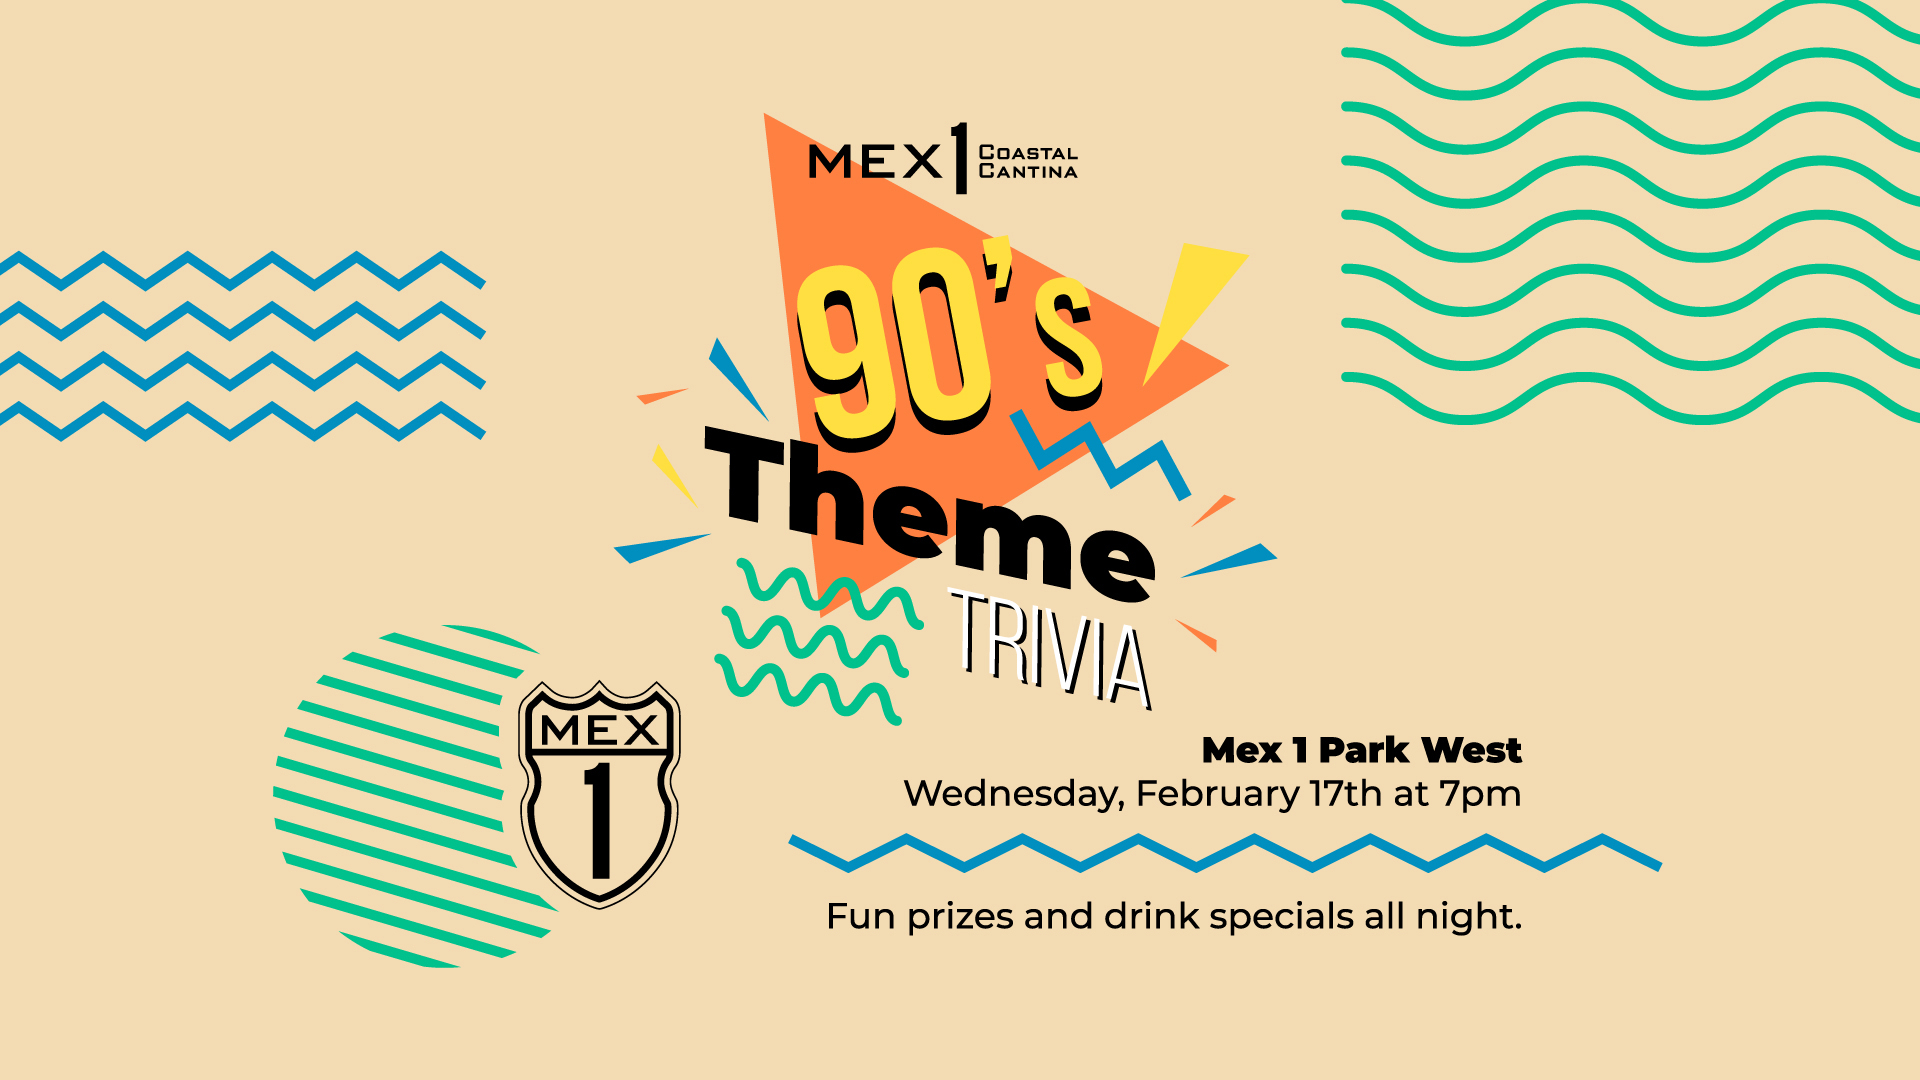 90's Theme Trivia at Mex 1 Park West on Wednesday, February 17th at 7 pm